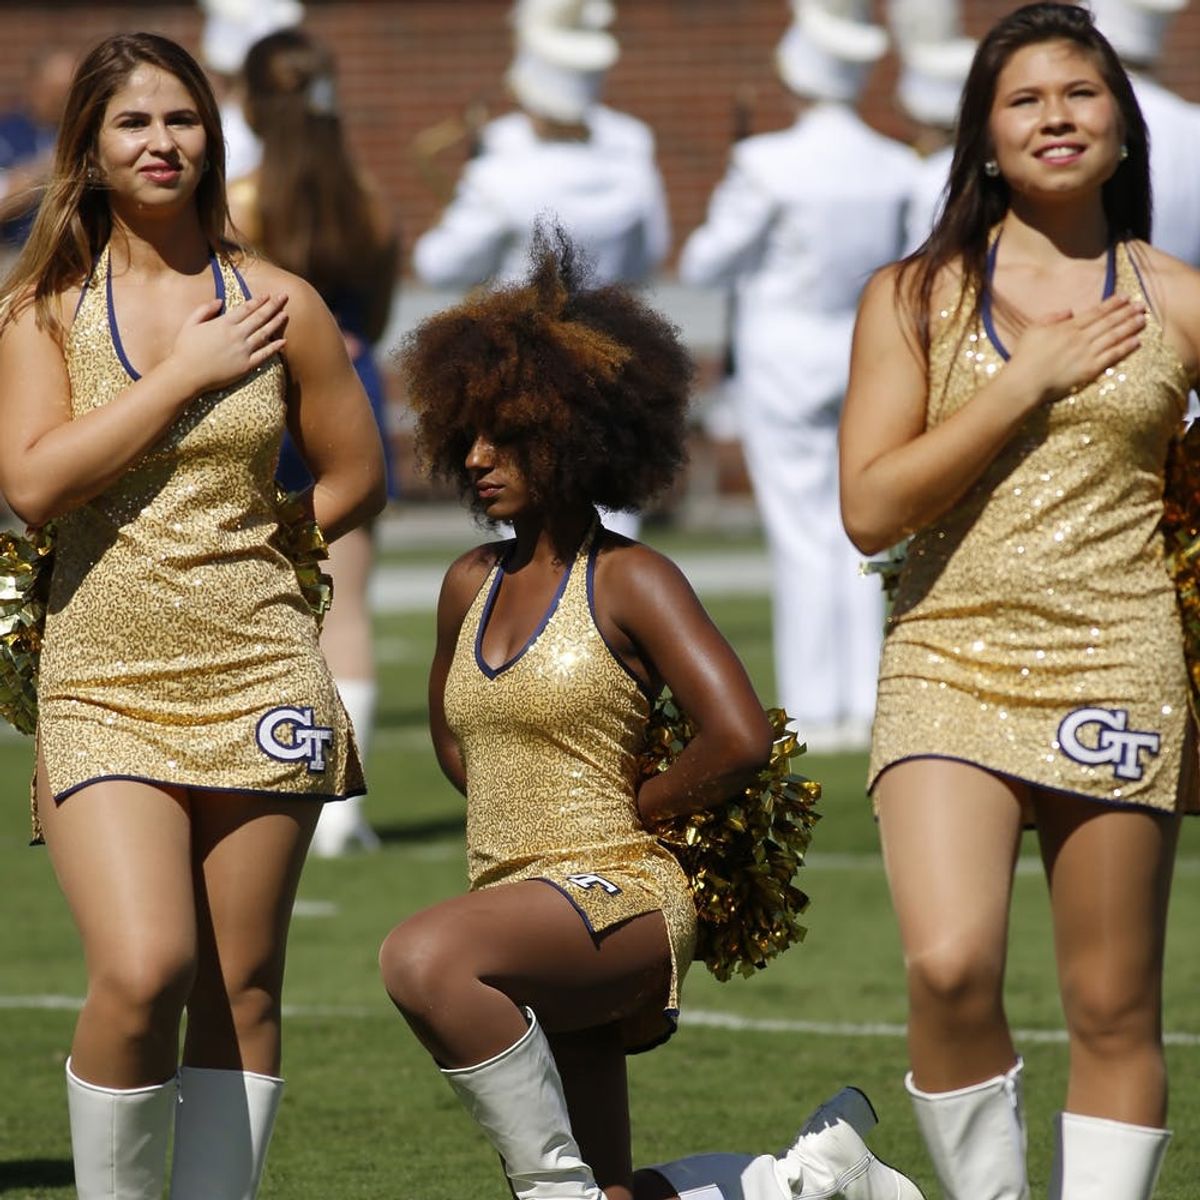 Here’s the Unexpected Story Behind the Viral #TakeAKnee Cheerleader Photo